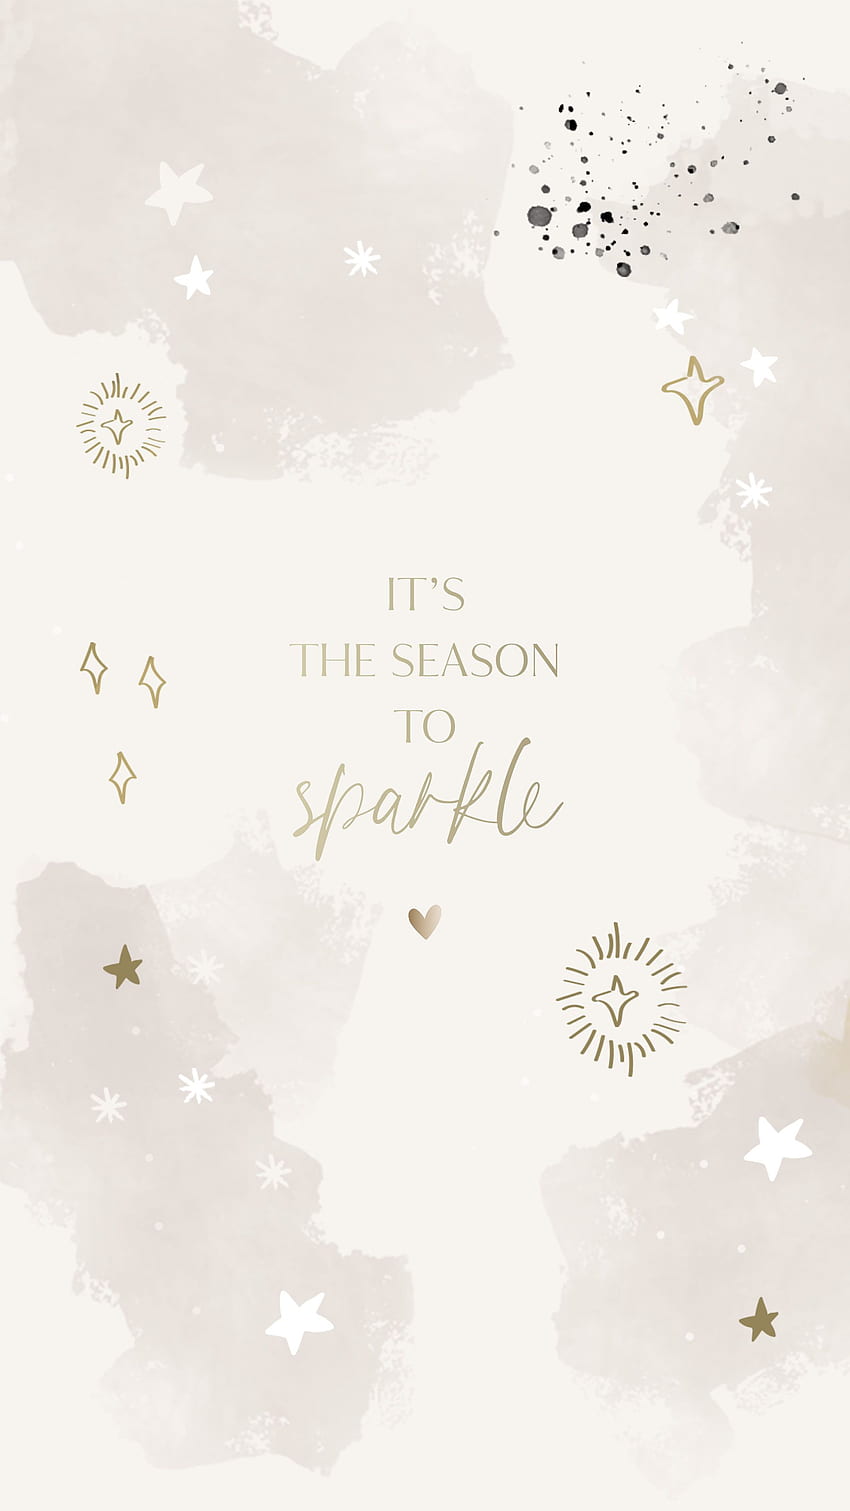 Its the son to sparkle - December